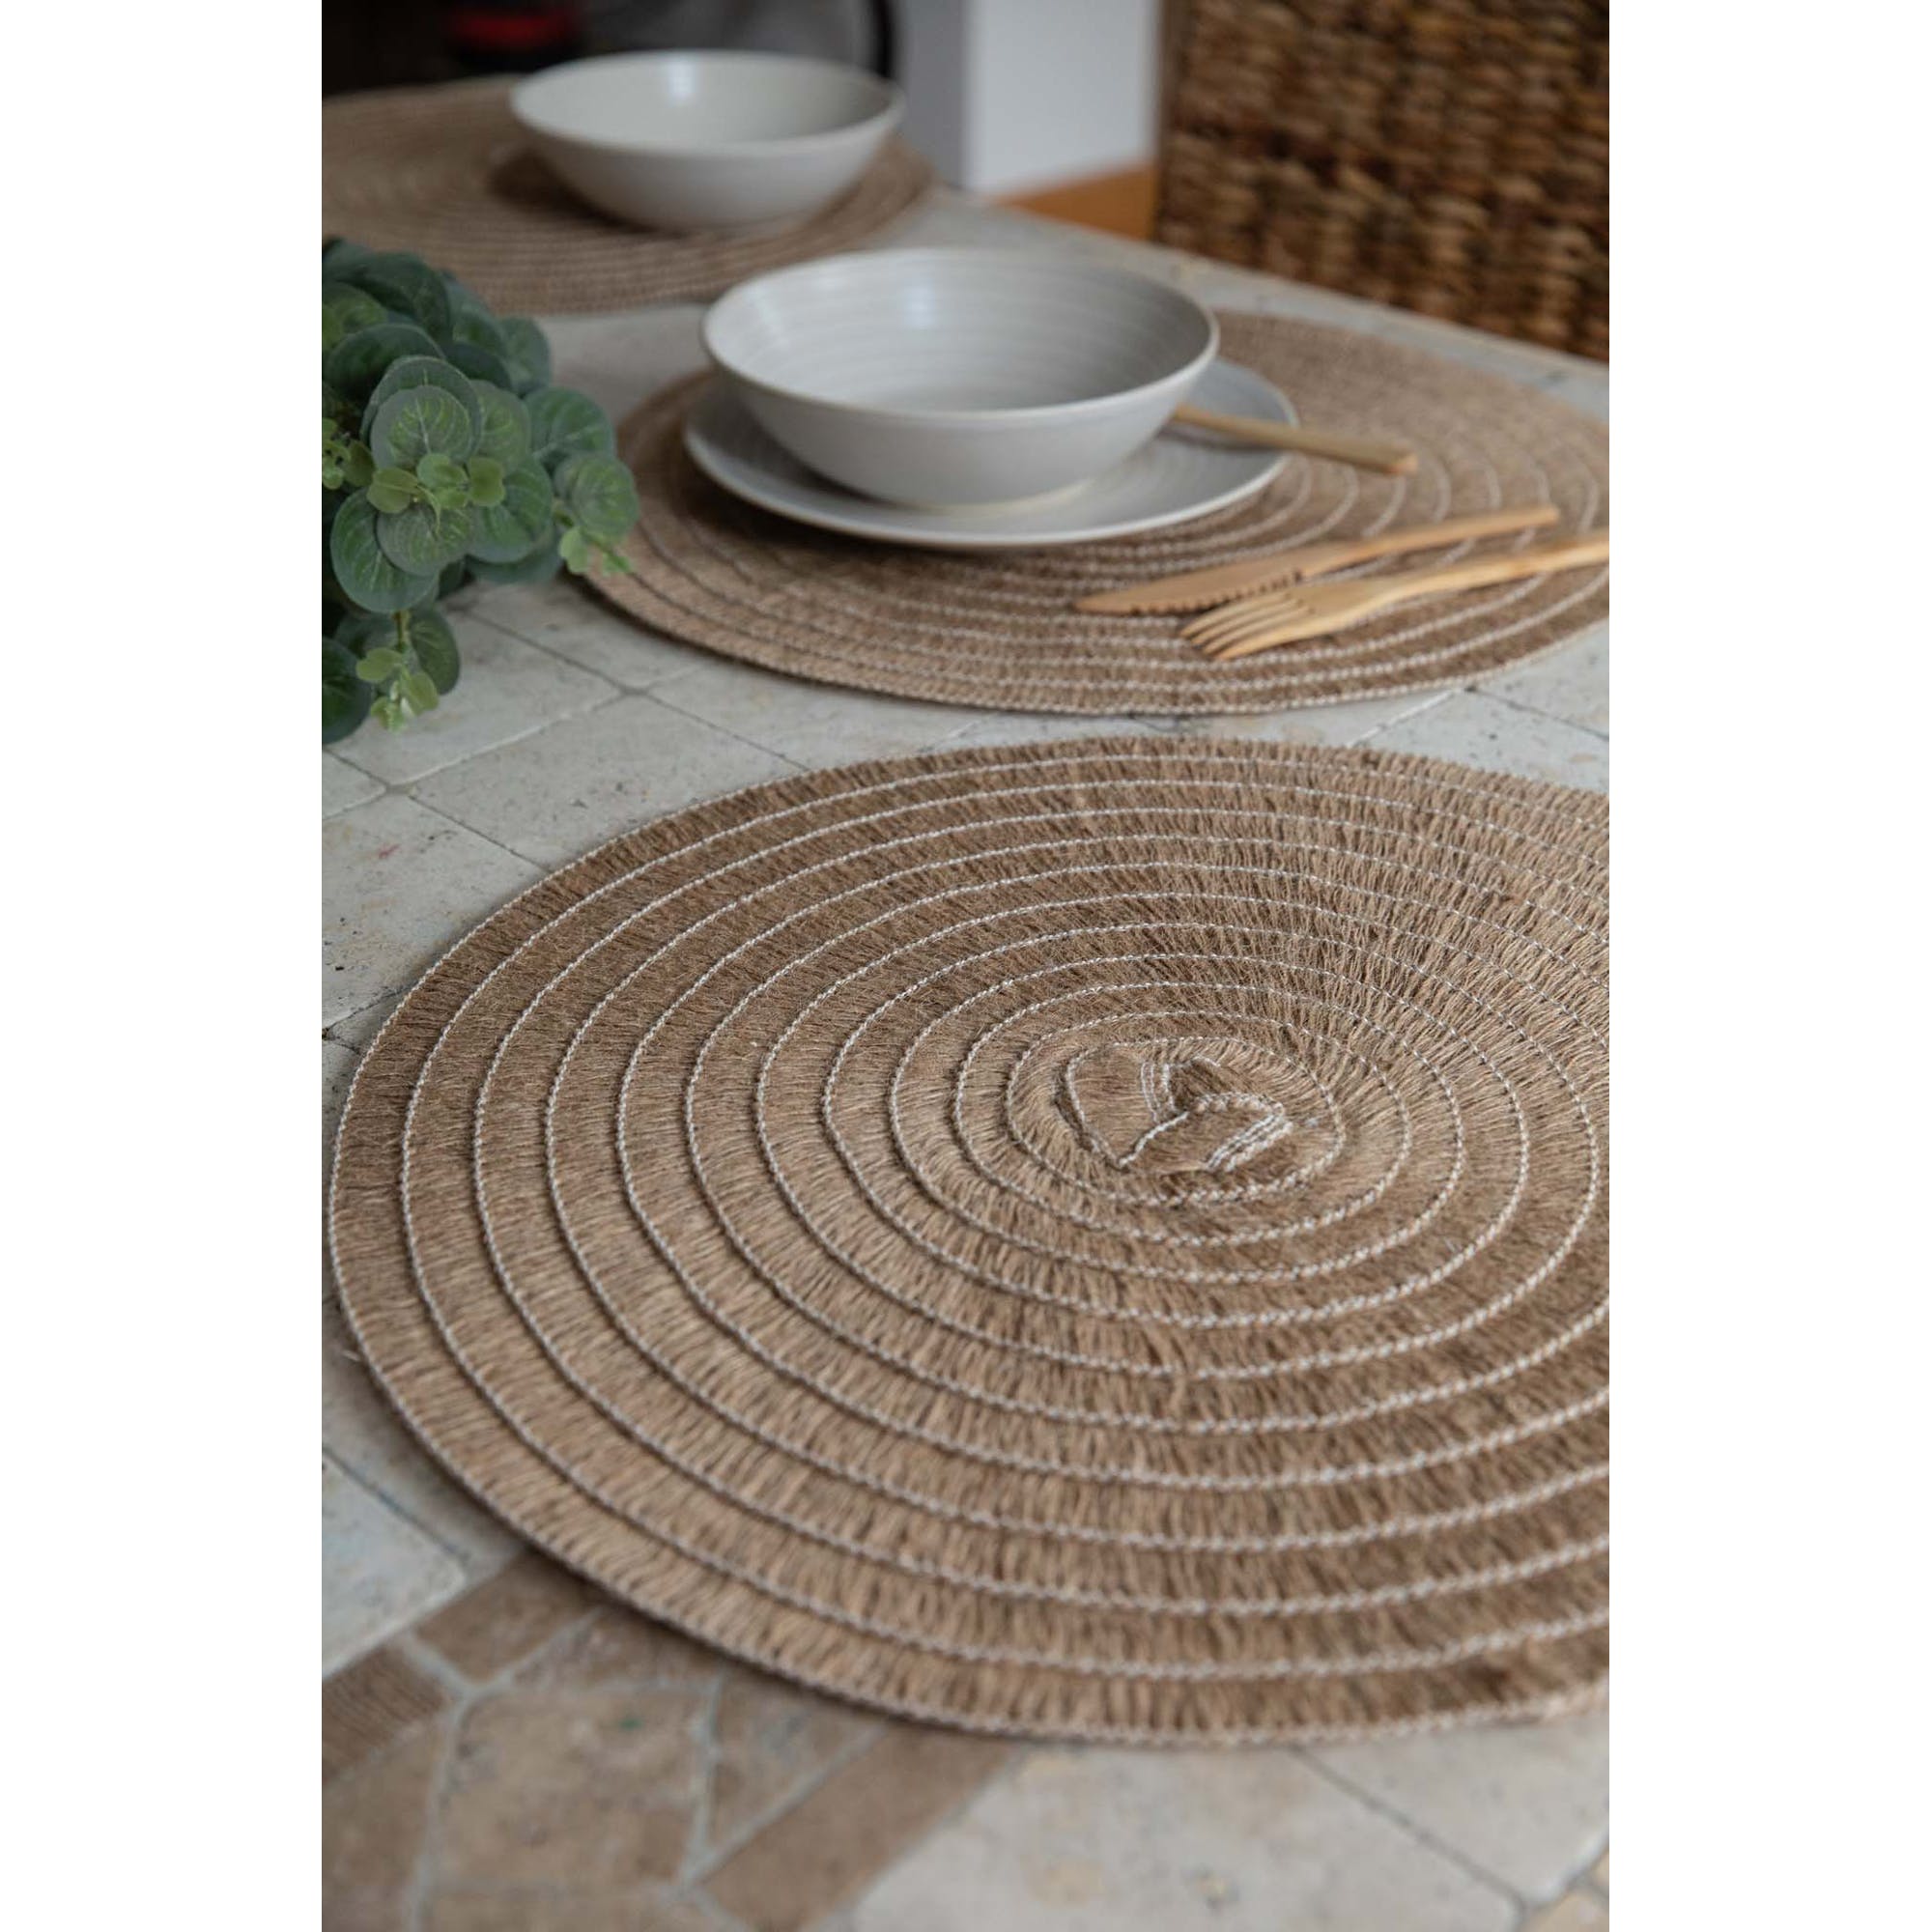 Hessian Placemats